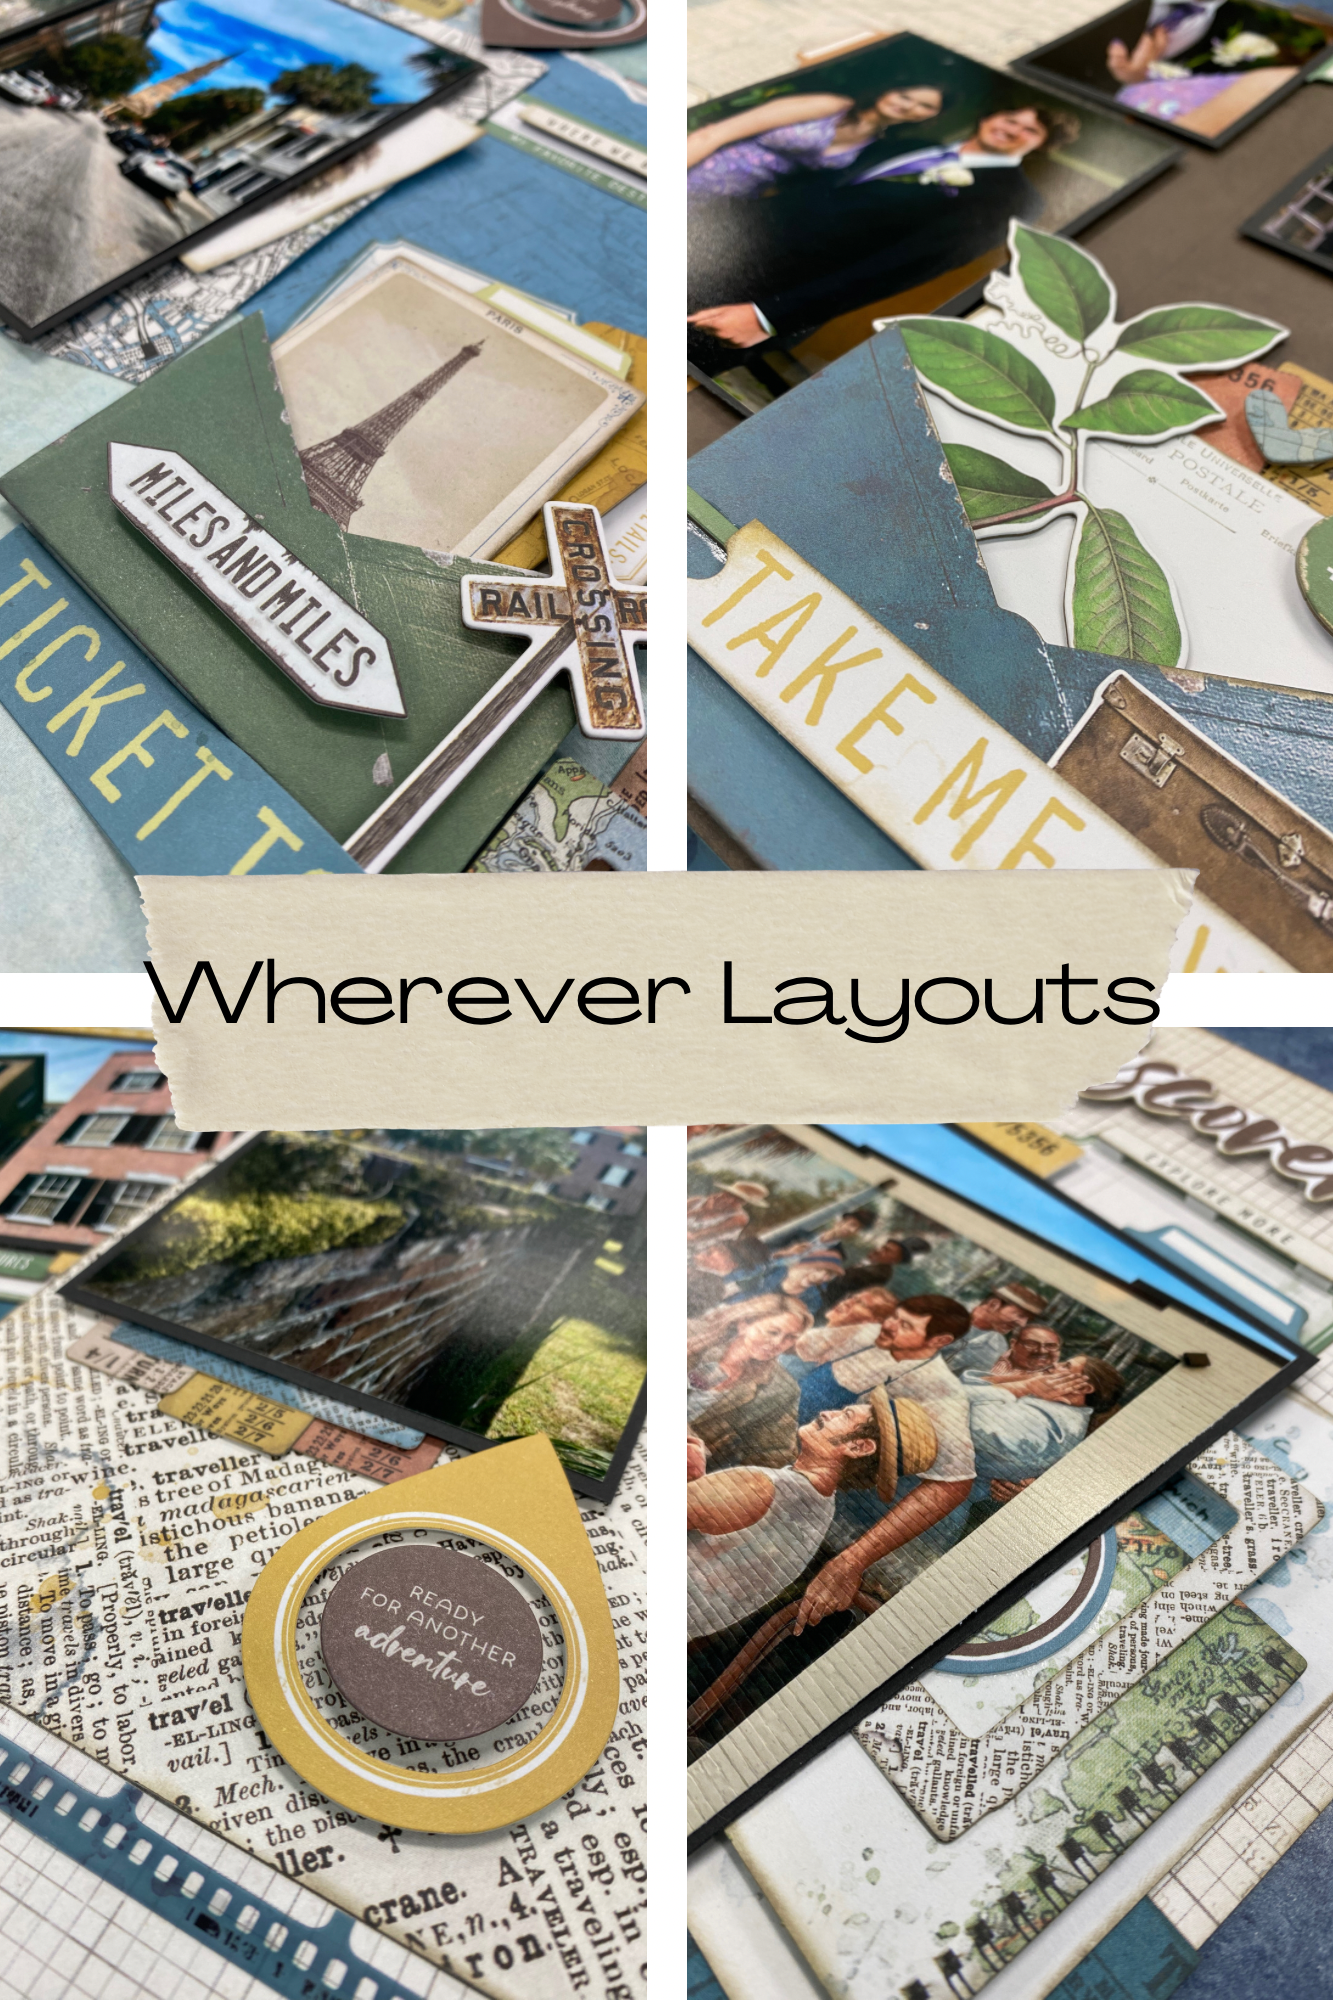 Wherever Layouts $50.00+tax SOLD OUT